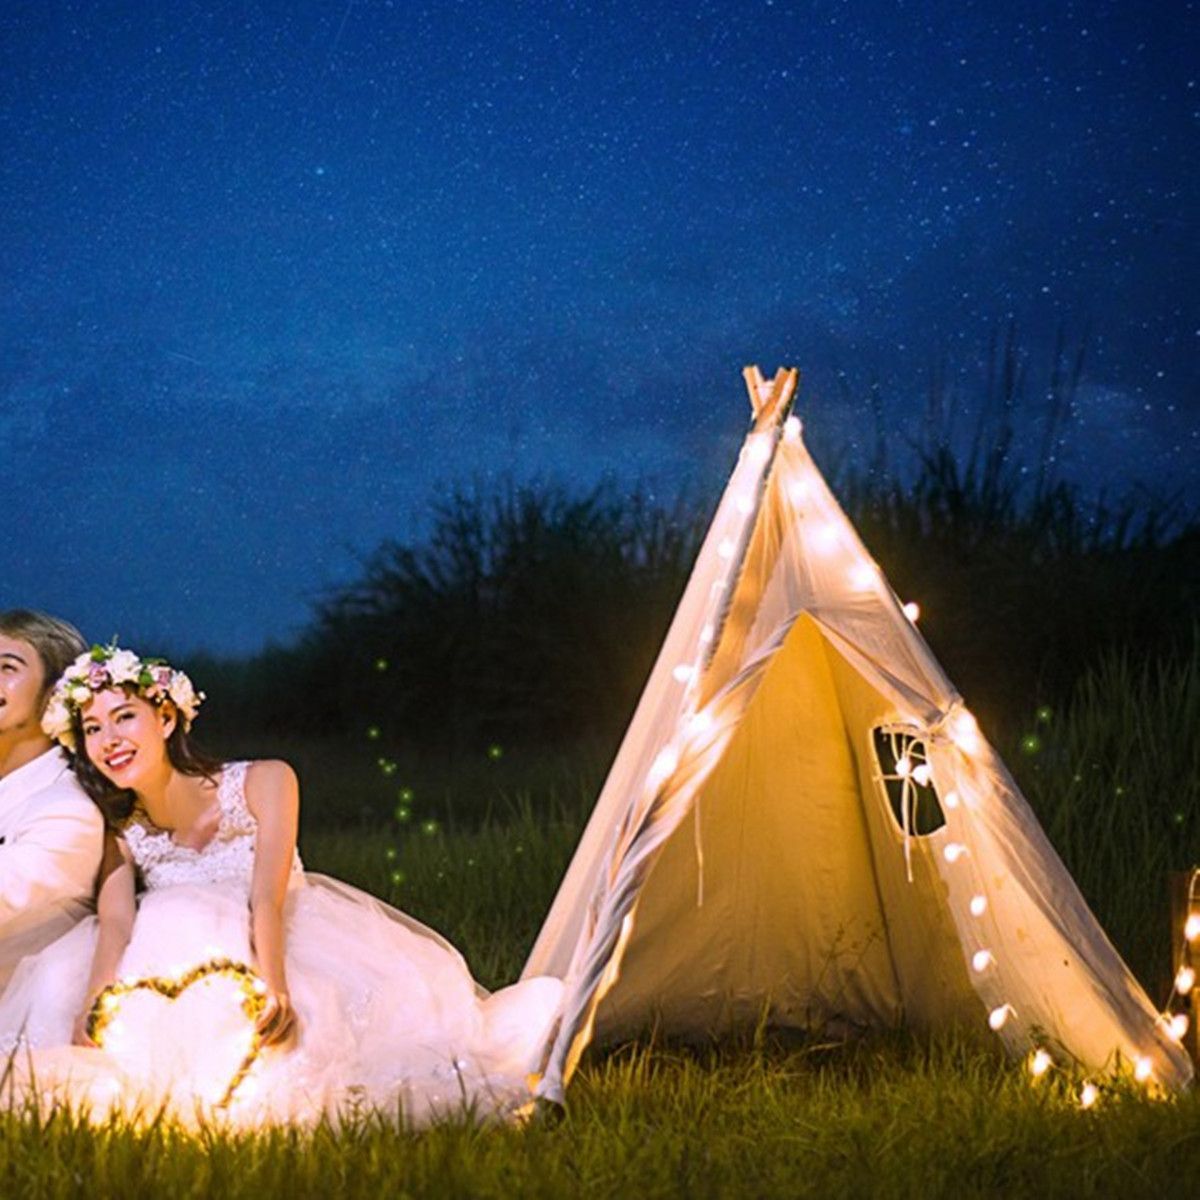 Portable-White-Teepee-Tent-Kids-Playhouse-Children-Sleeping-Dome-Photograph-Backdrop-51quot-1400540